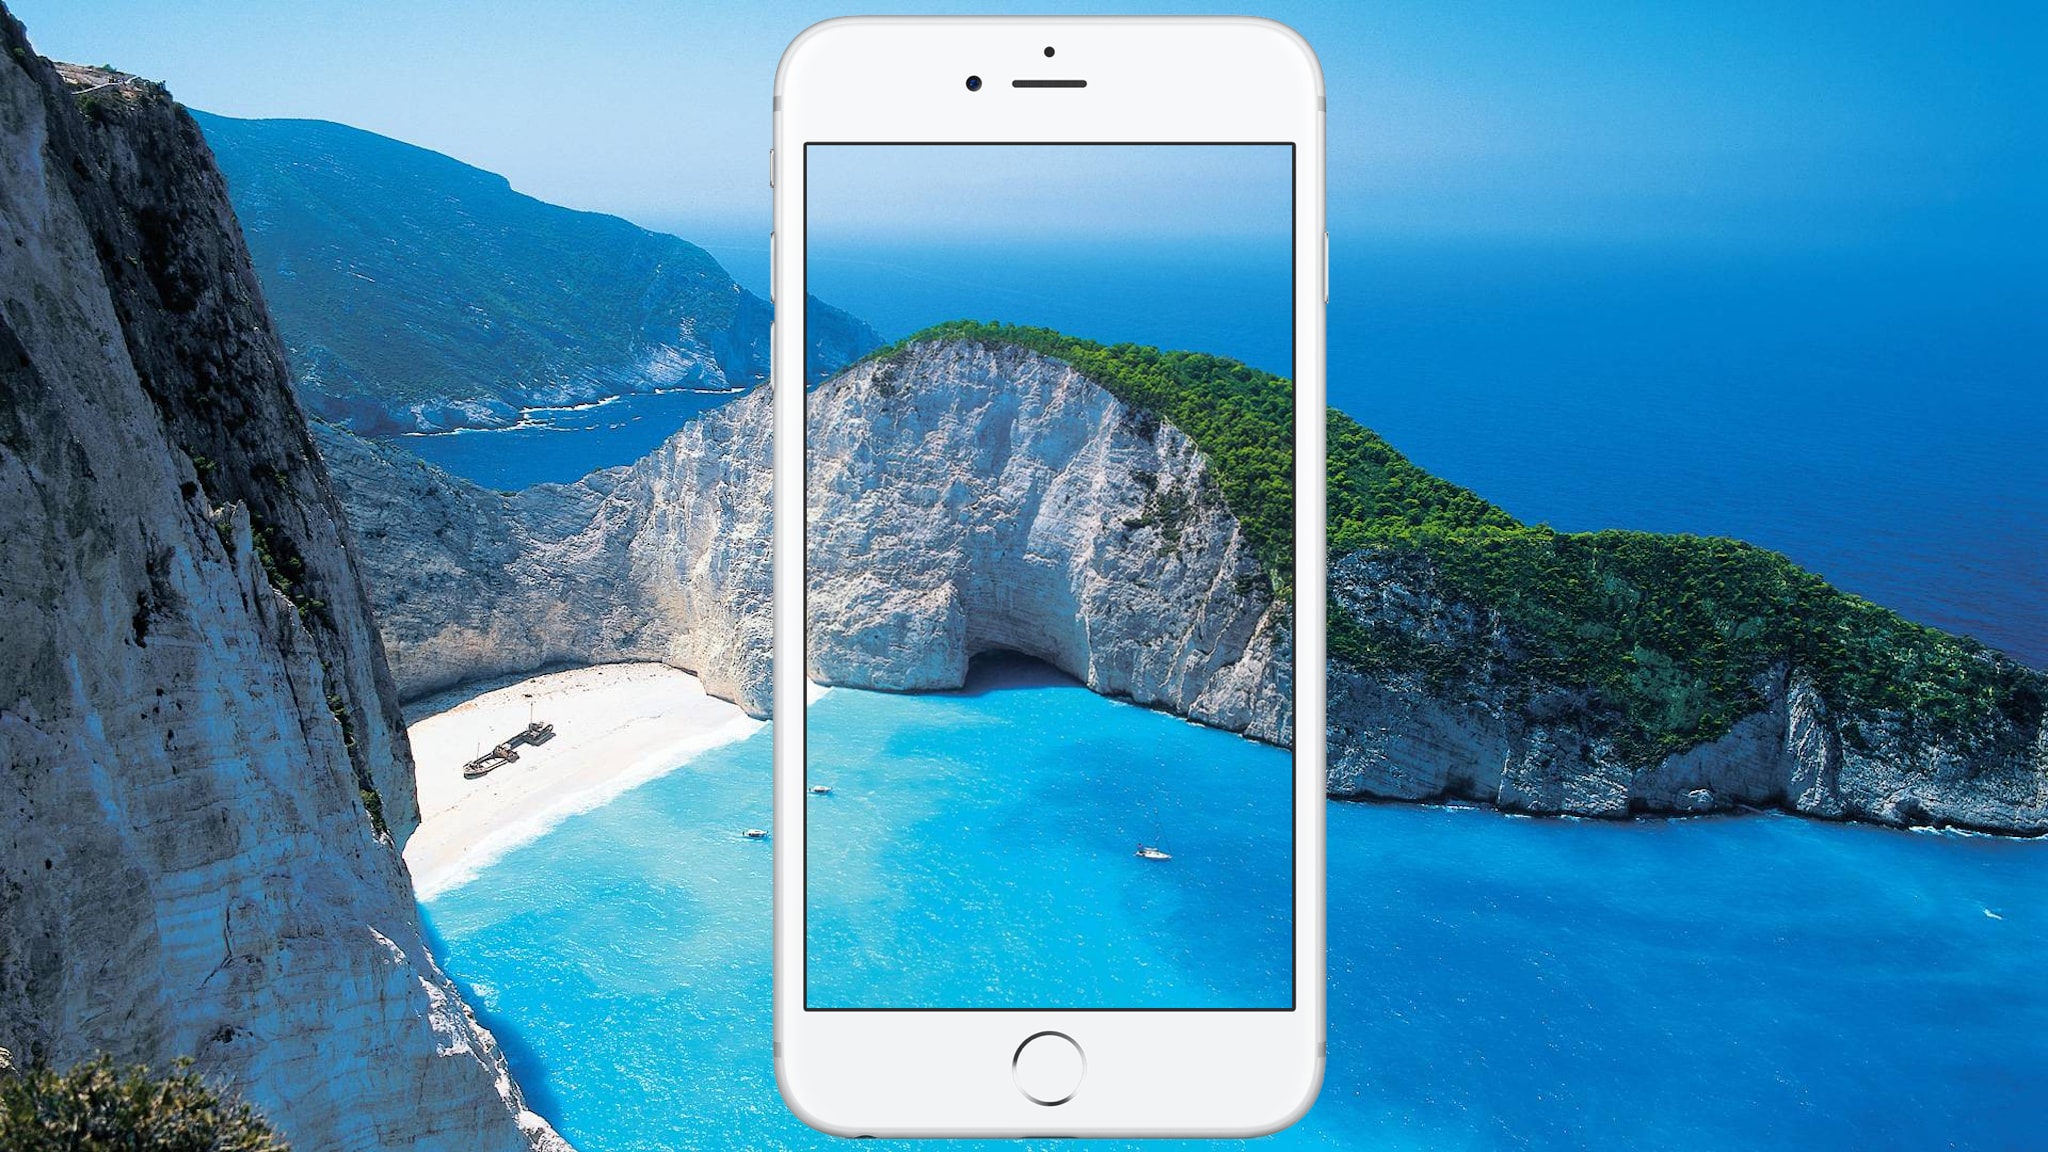 The best wallpaper apps for iPhone